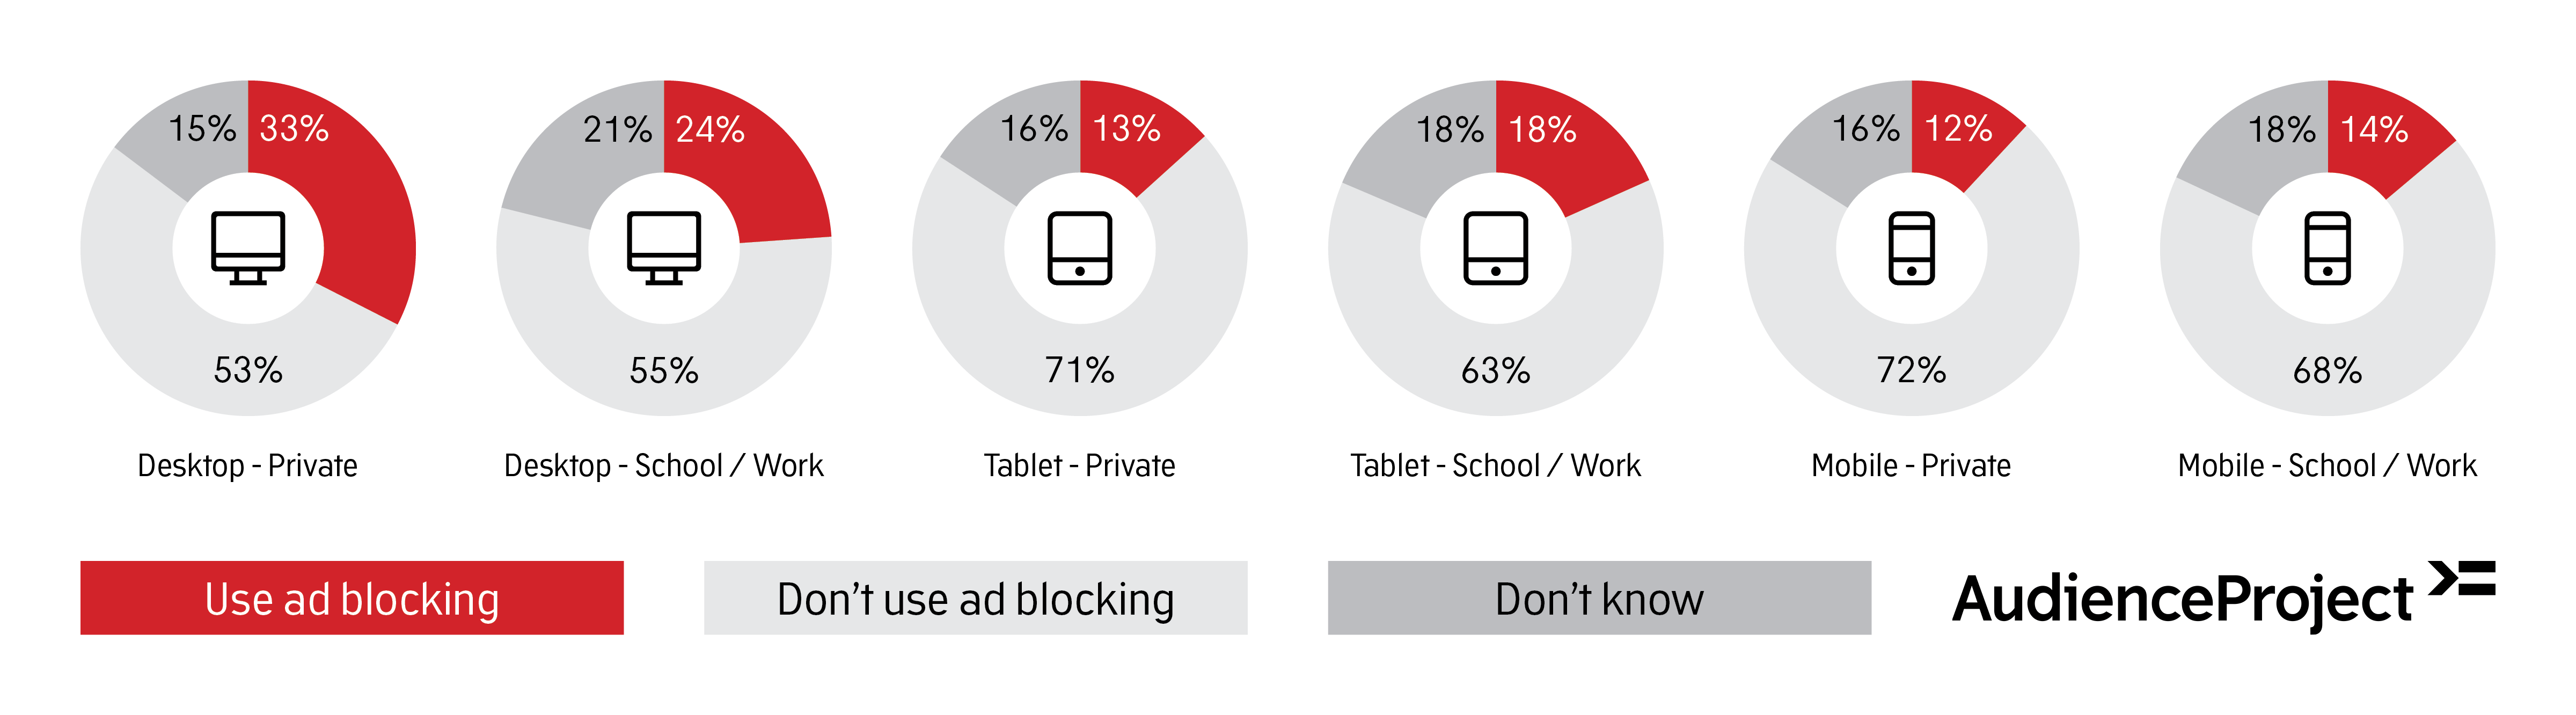 graphic_answered_ad_blocking_across_devices